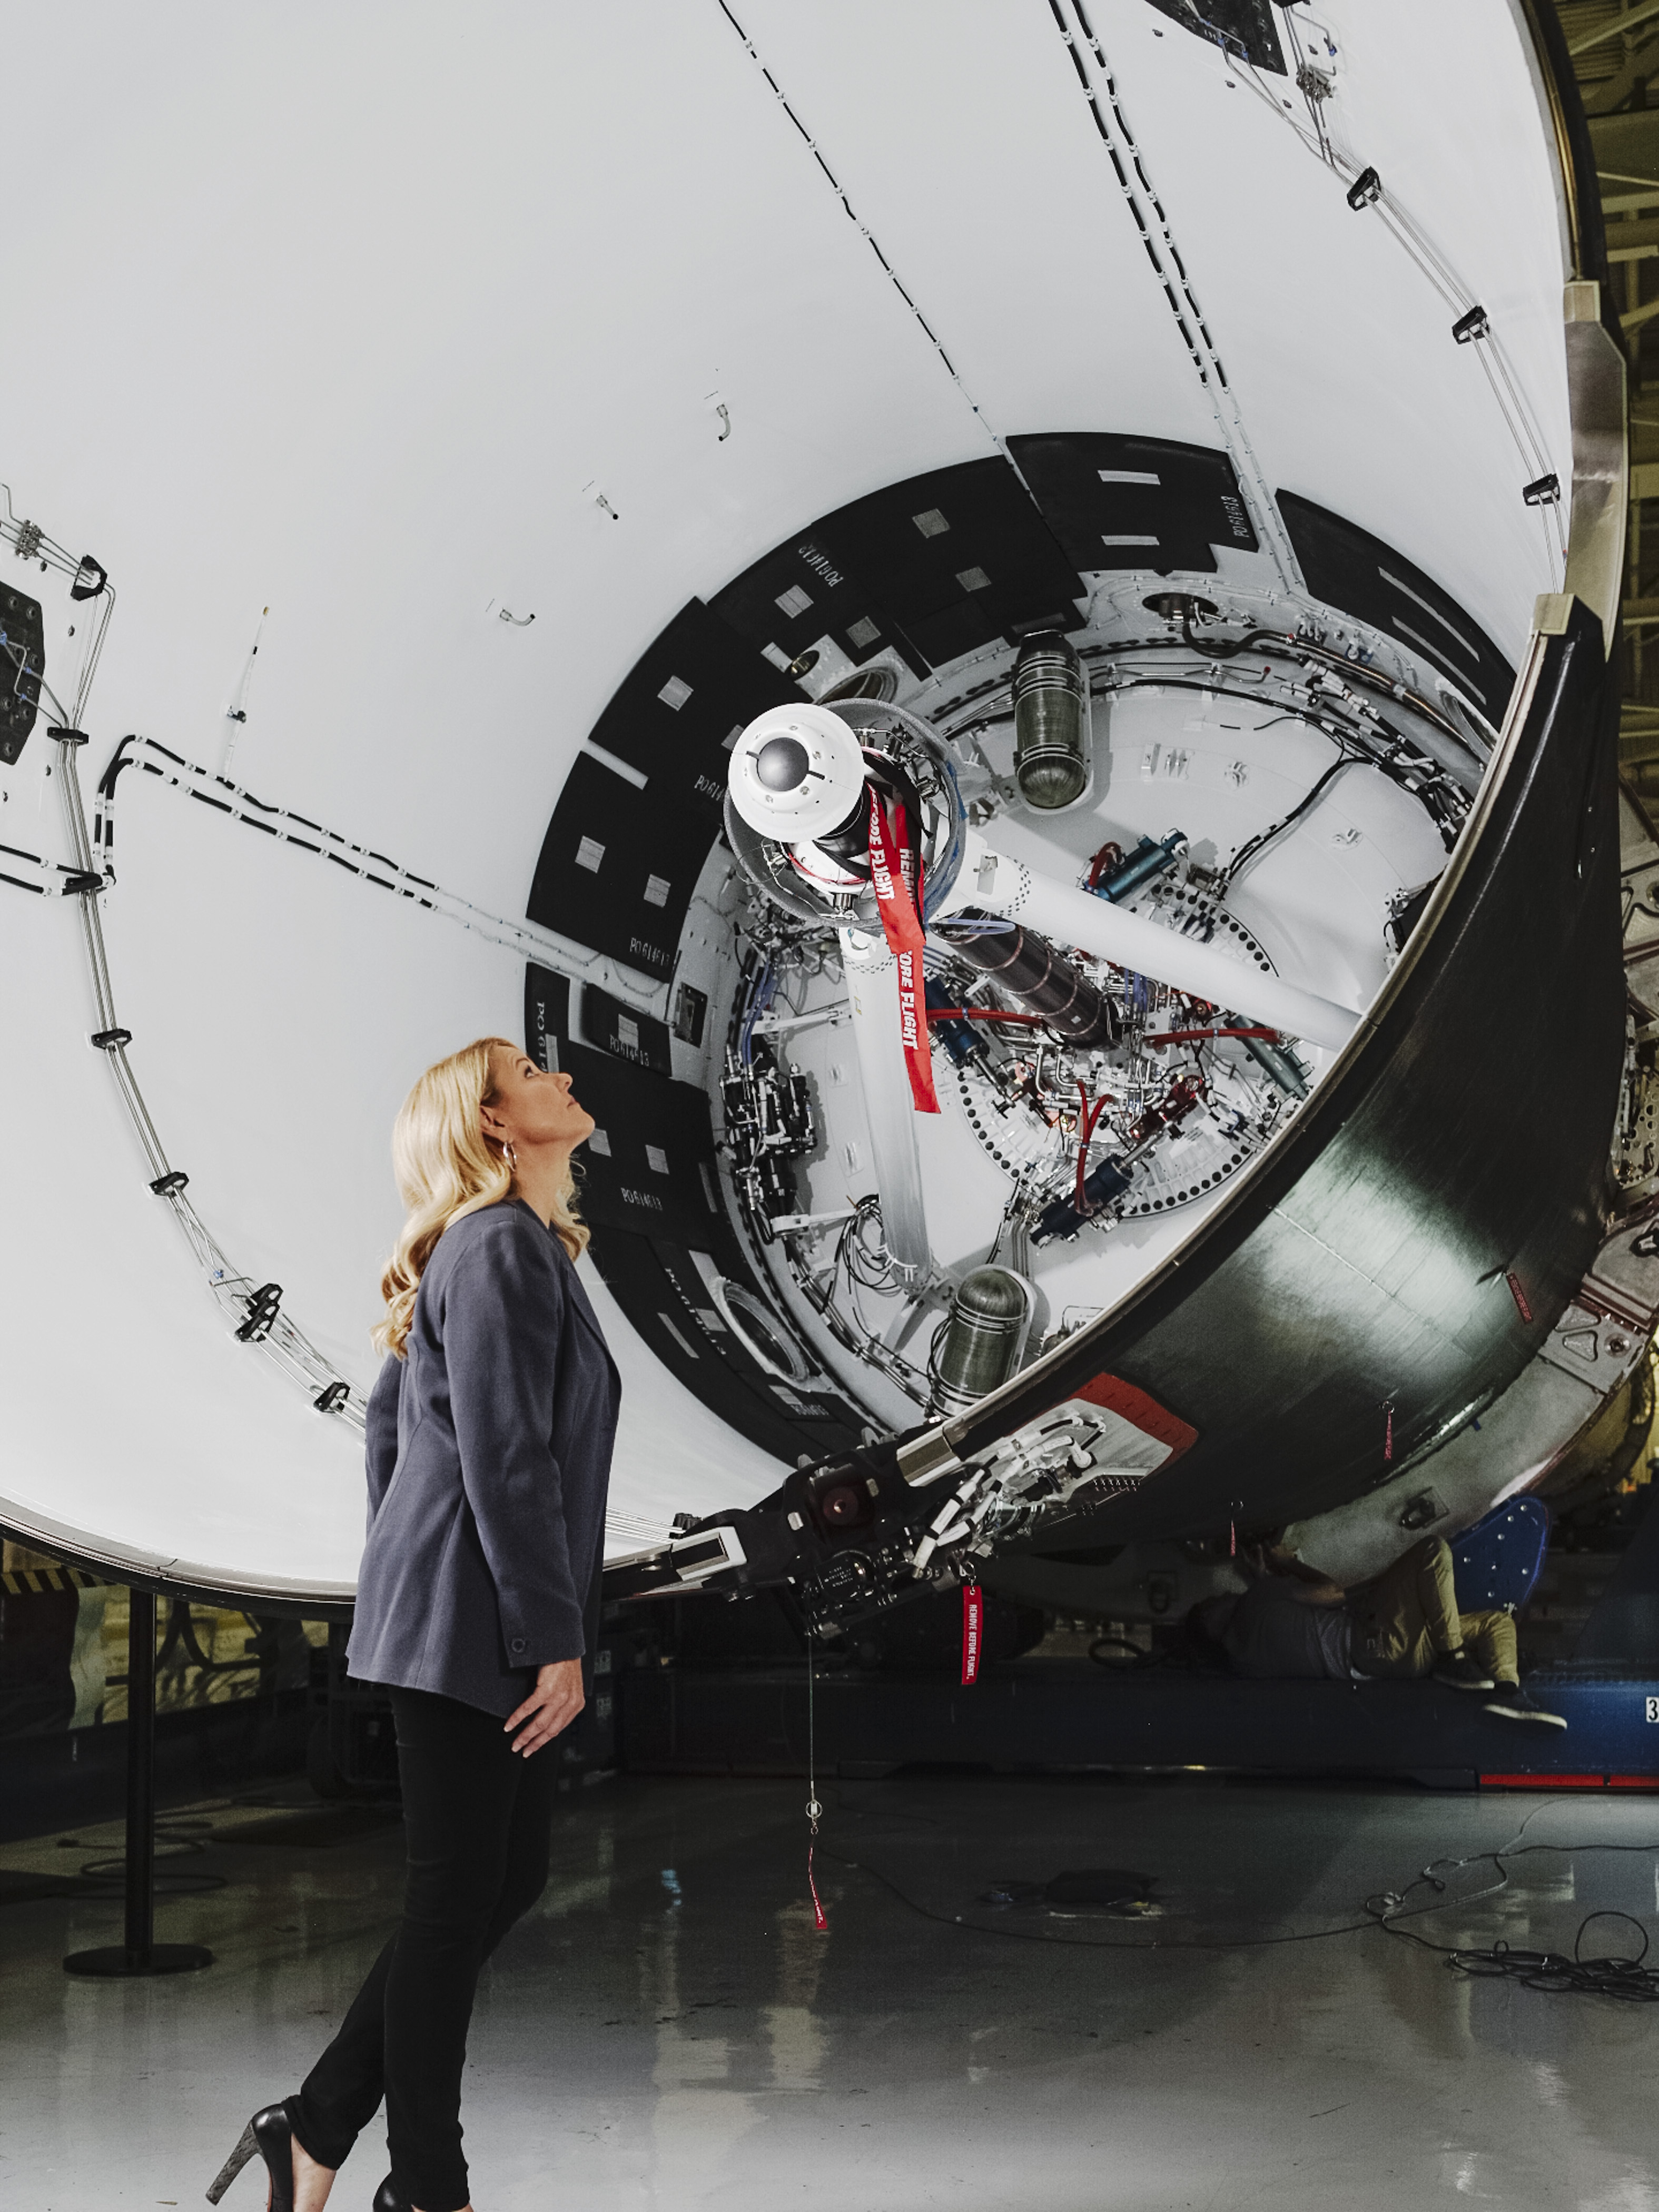 Gwynne Shotwell looks over the manufacturing of a rocket at a Space-X manufacturing facility in Los Angeles, California